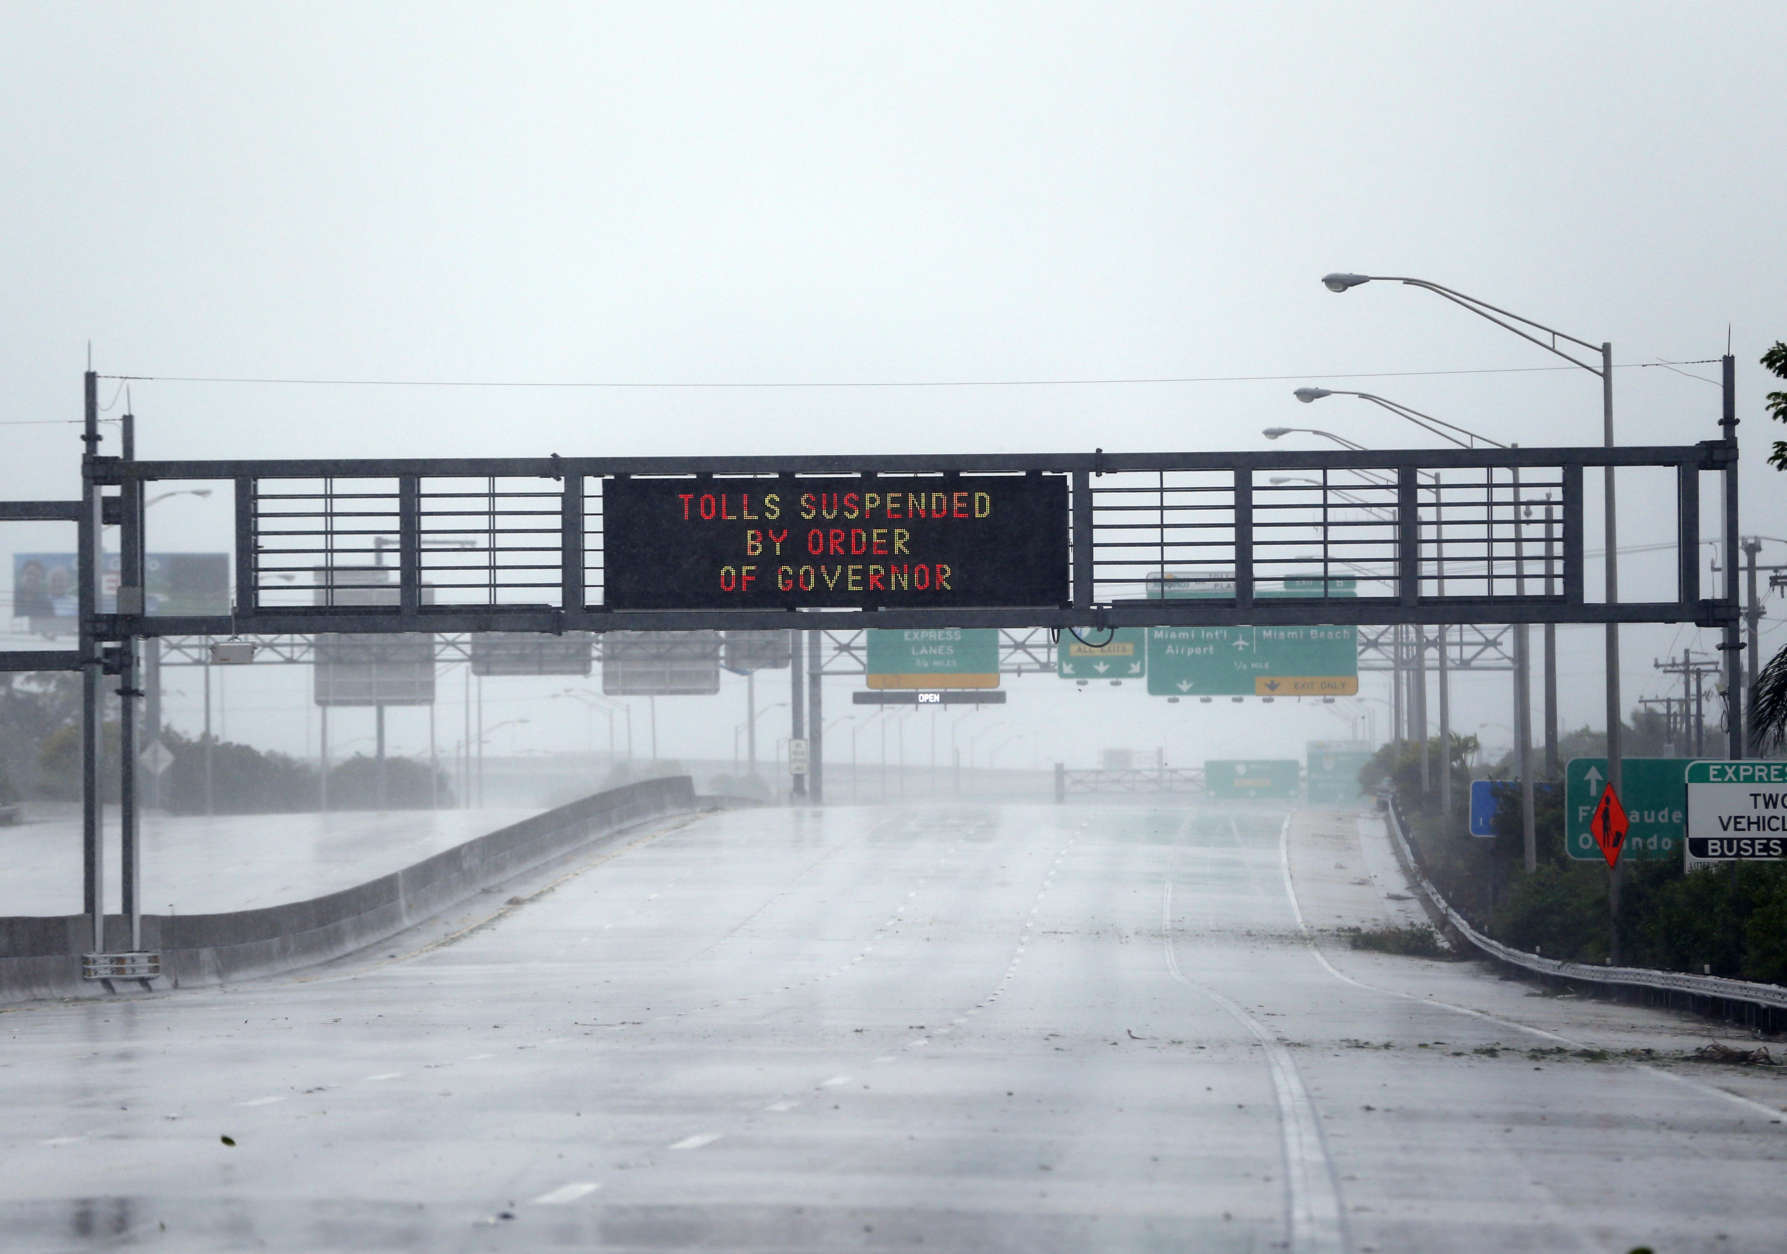 Interstate 95 Northbound is deserted as Hurricane Irma passes by, Sunday, Sept. 10, 2017, in Miami. (AP Photo/Wilfredo Lee)